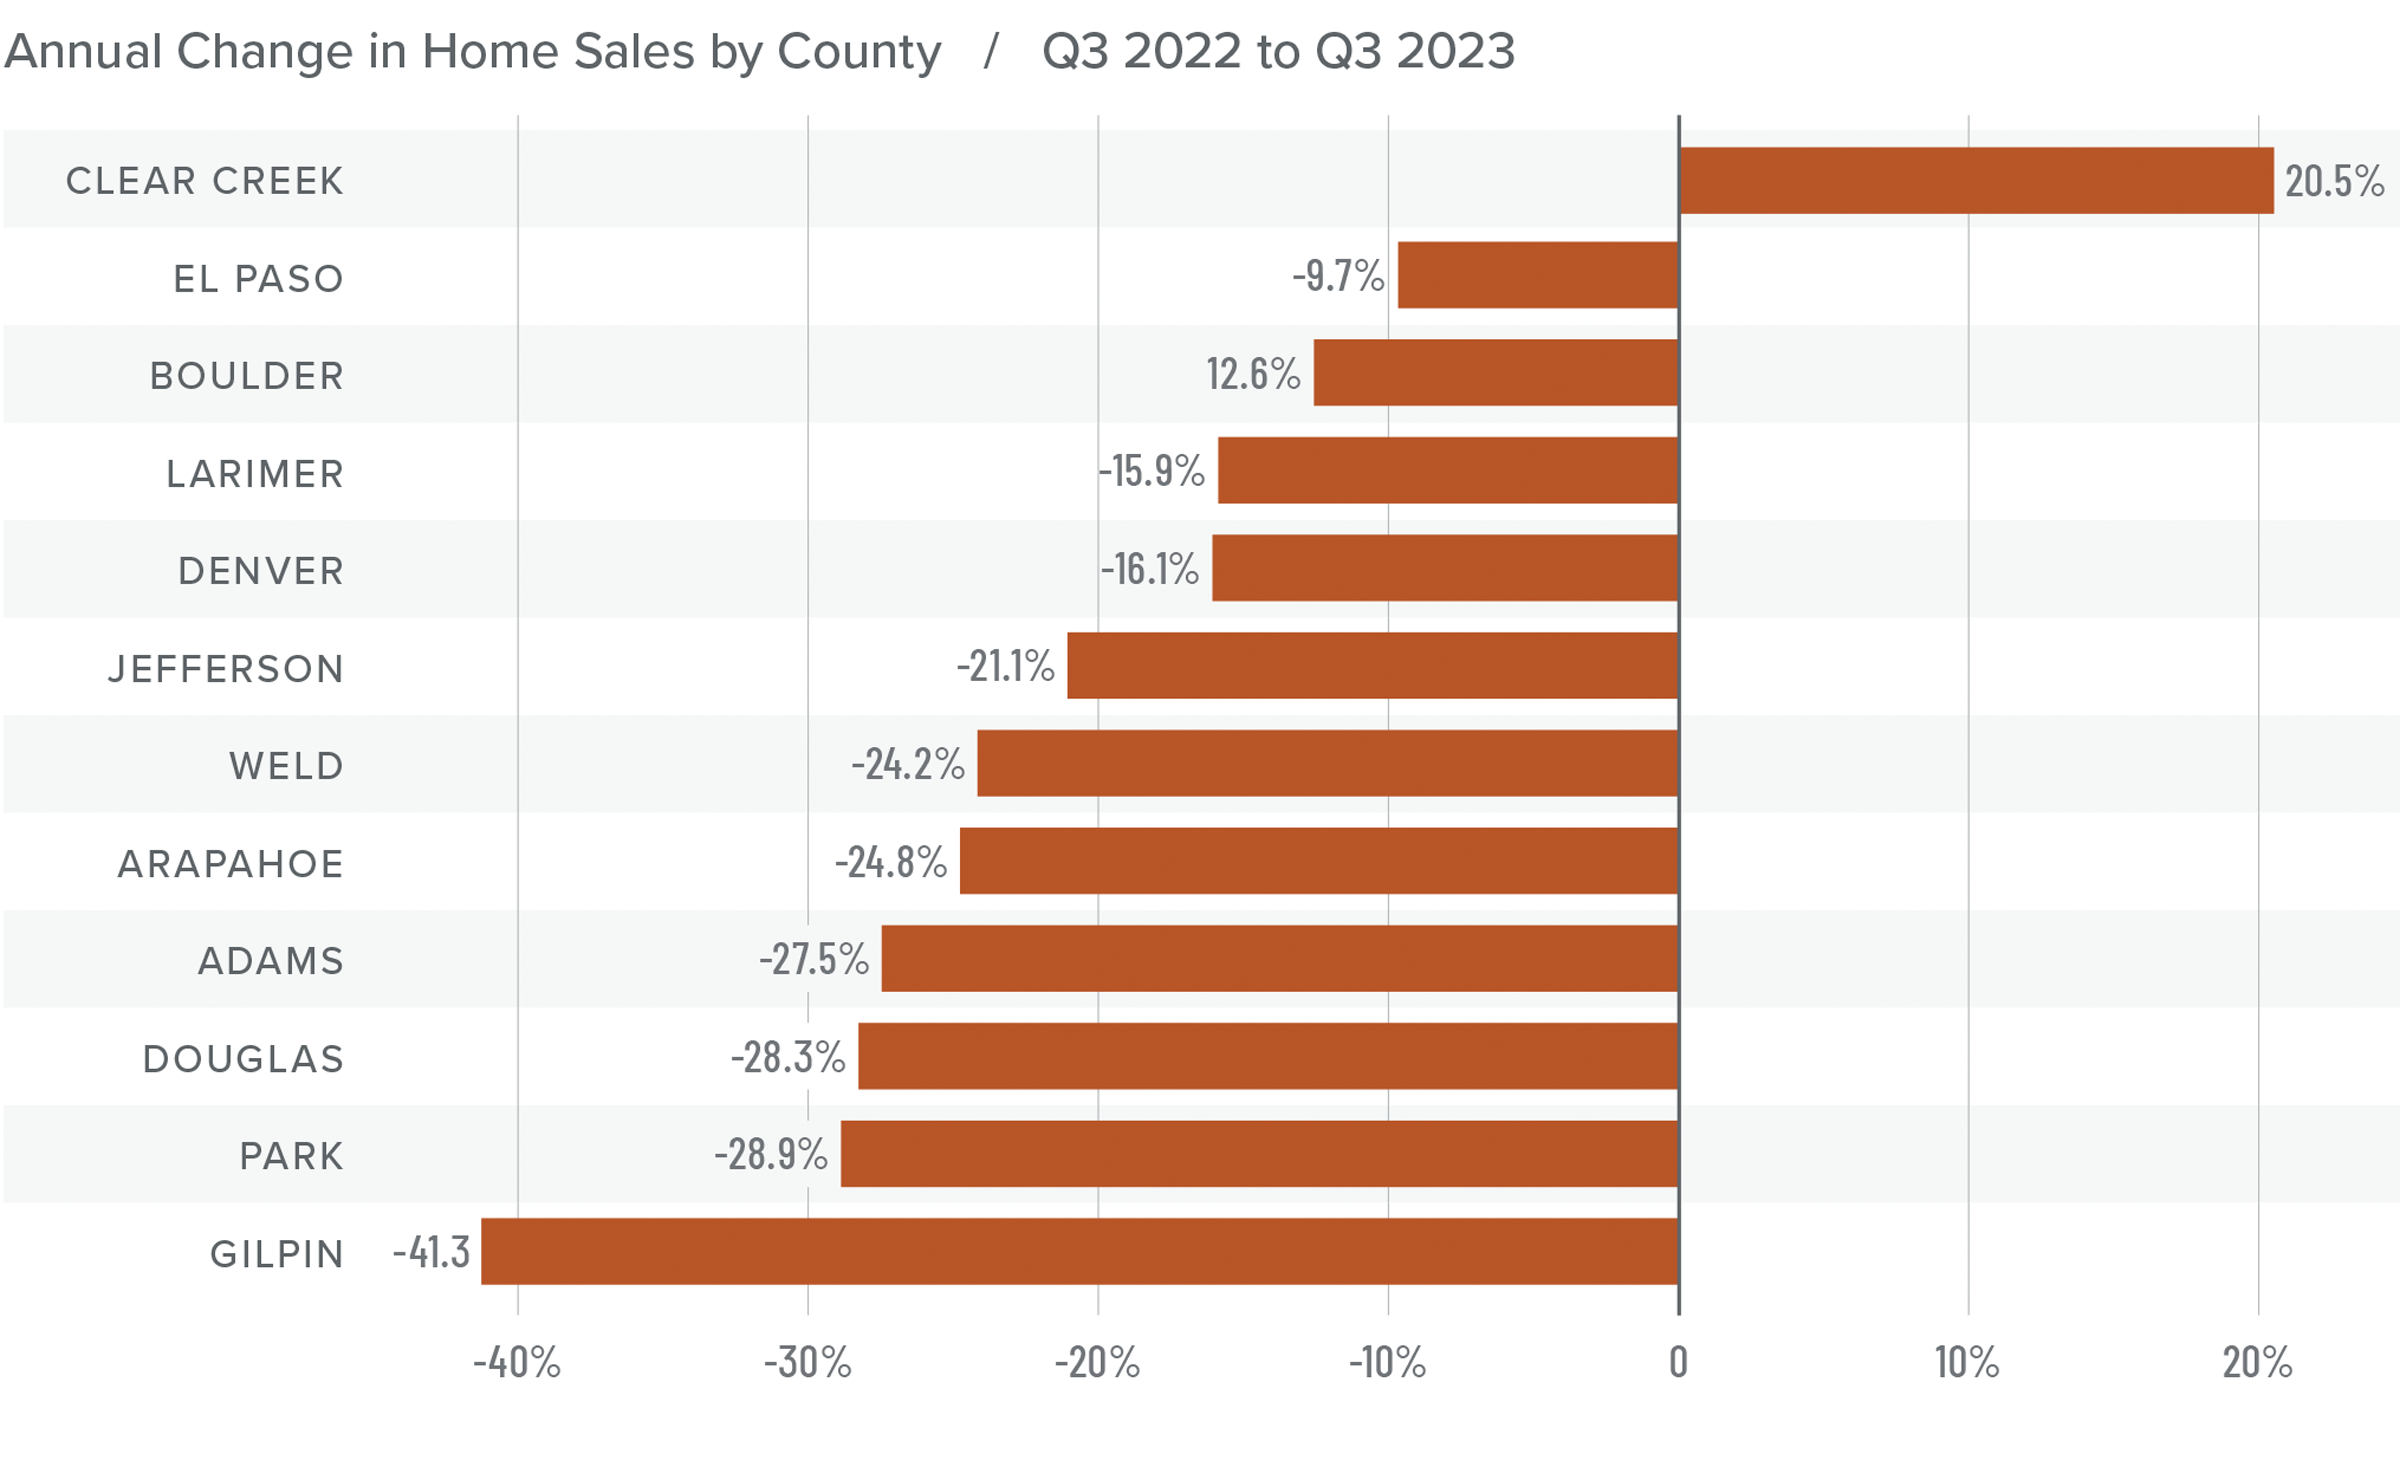 A graph showing the annual change in home sales by county in Colorado from Q3 2022 to Q3 2023. El Paso County had the least drastic change at -9.7%, while Gilpin had the largest change at -41.3%. Clear Creek is the only county with an increase, sitting at the top of the bar graph with 20.5 percent. 